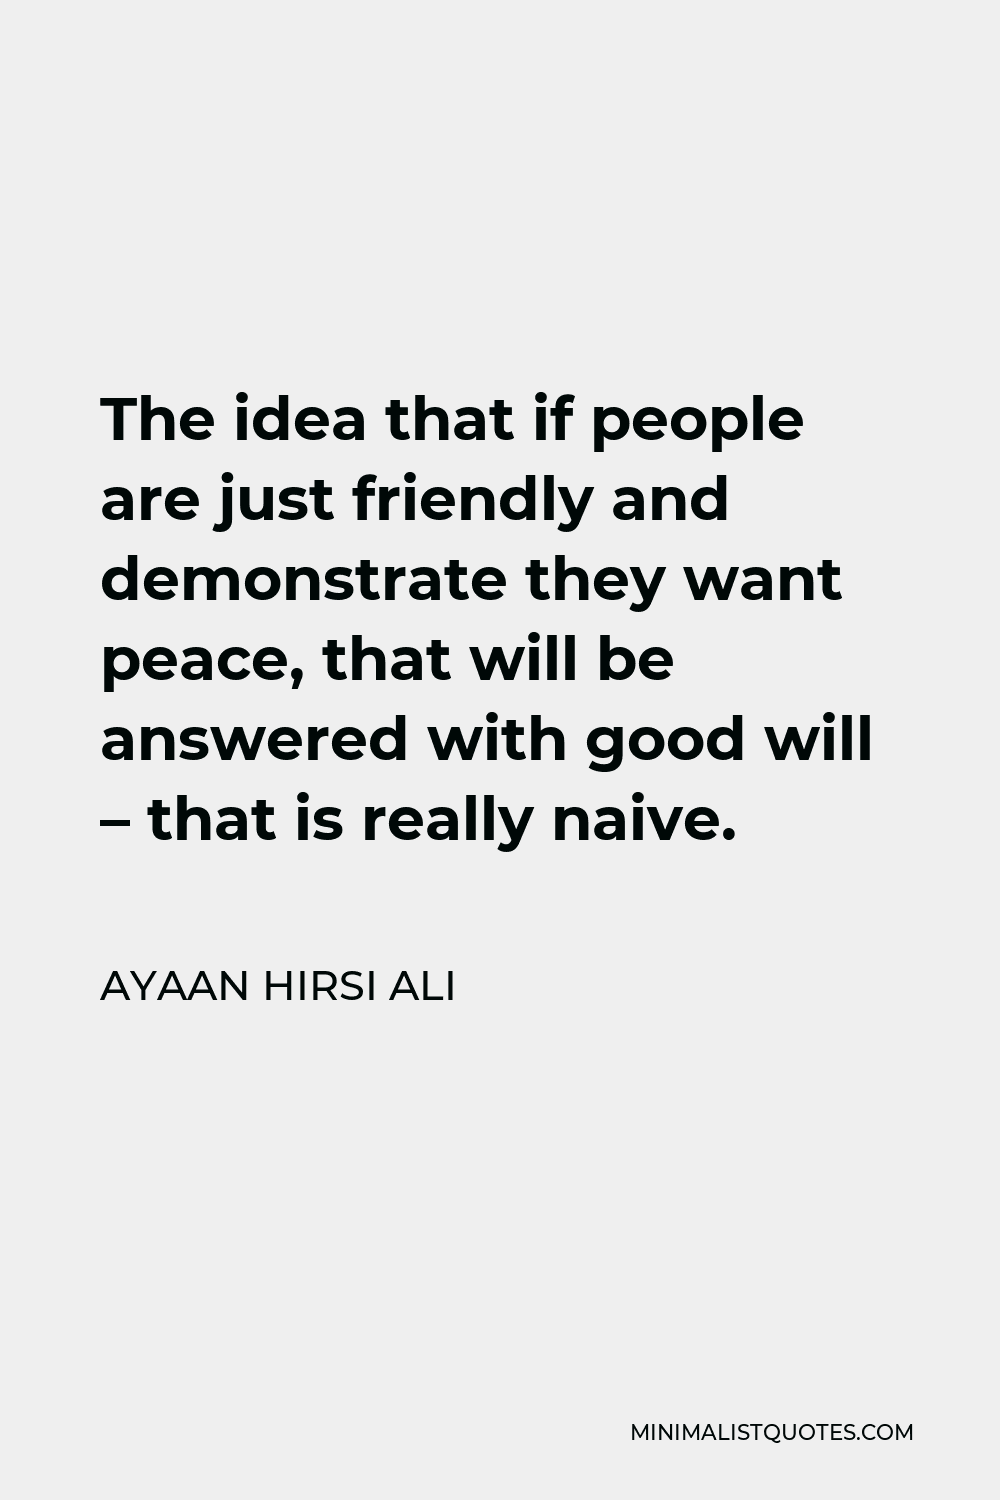 Ayaan Hirsi Ali Quote - The idea that if people are just friendly and demonstrate they want peace, that will be answered with good will – that is really naive.